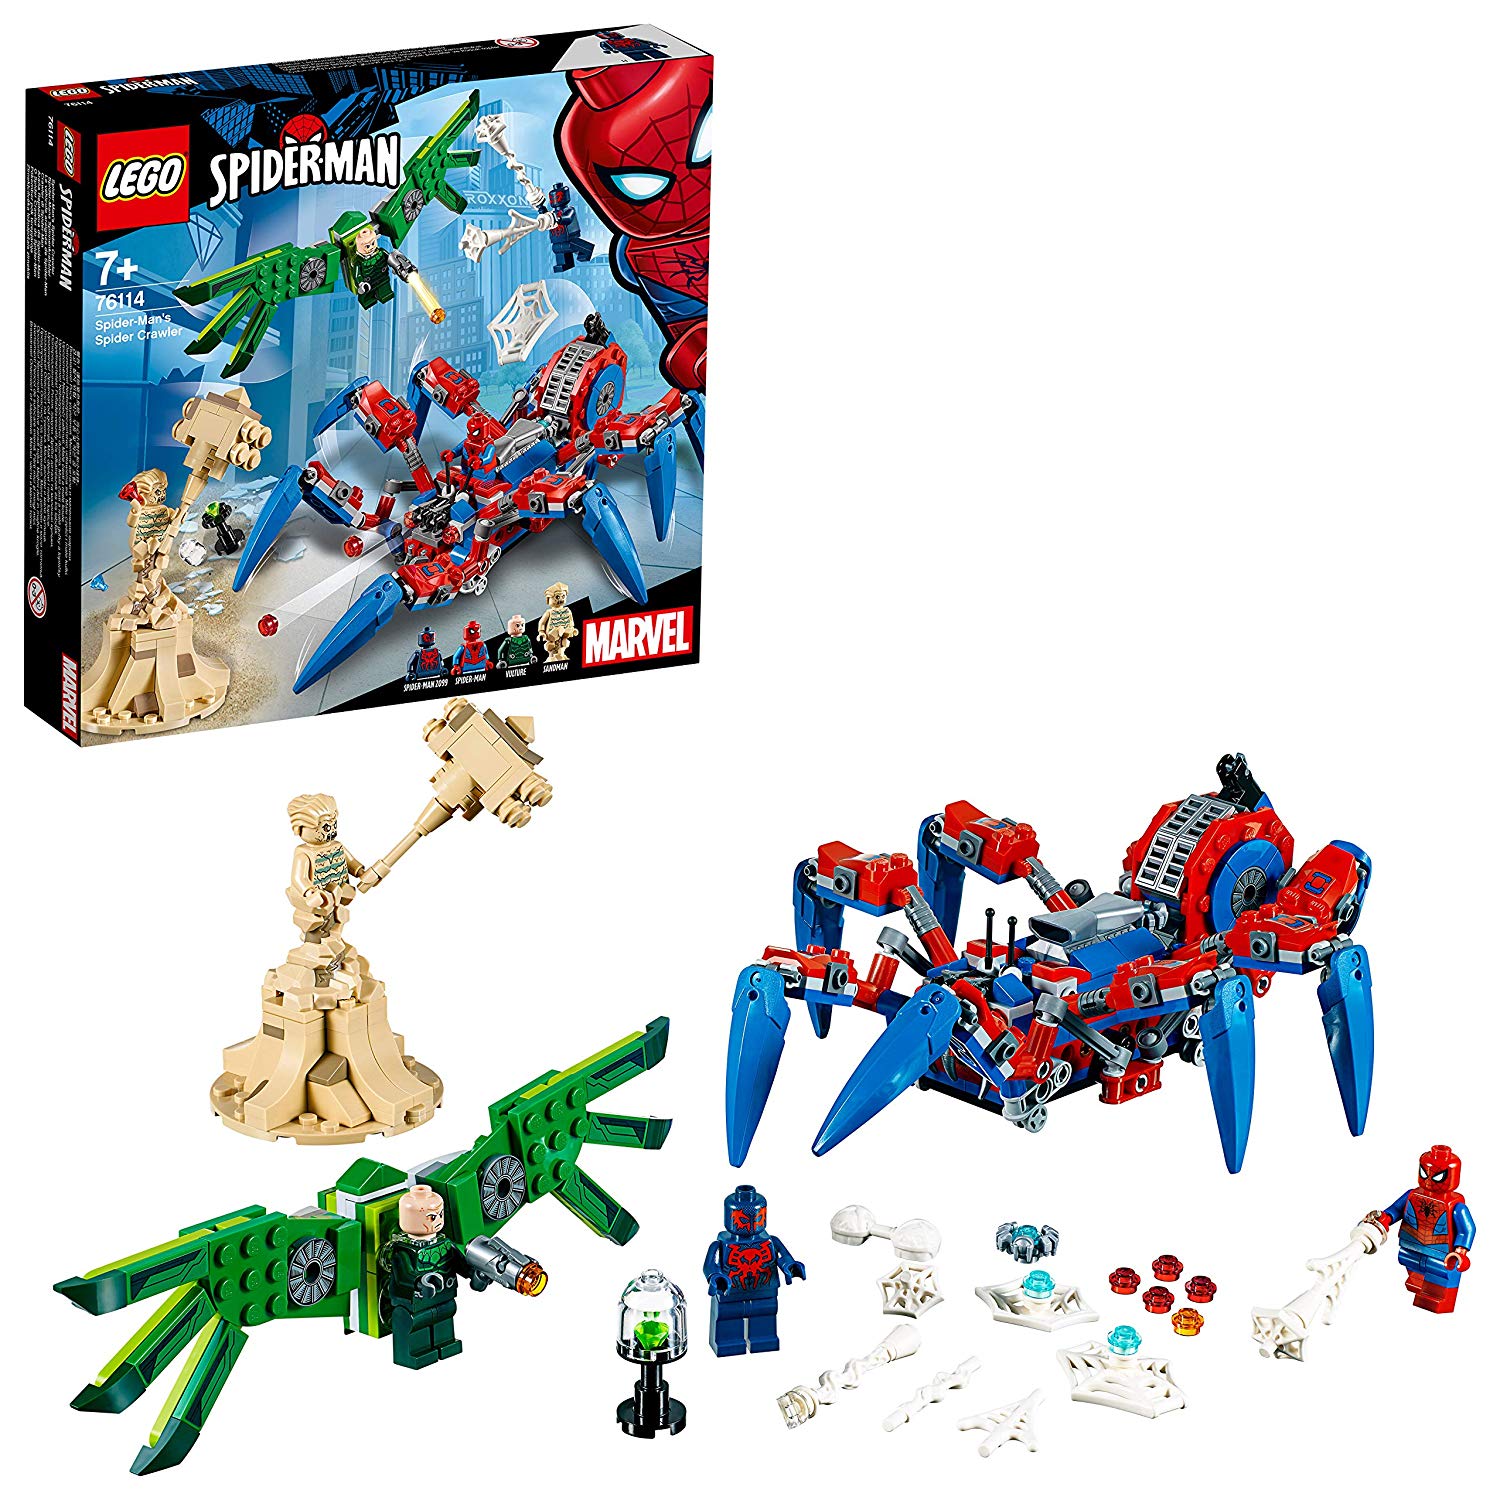 Lego 76114 Childrens Toy Multi-Coloured